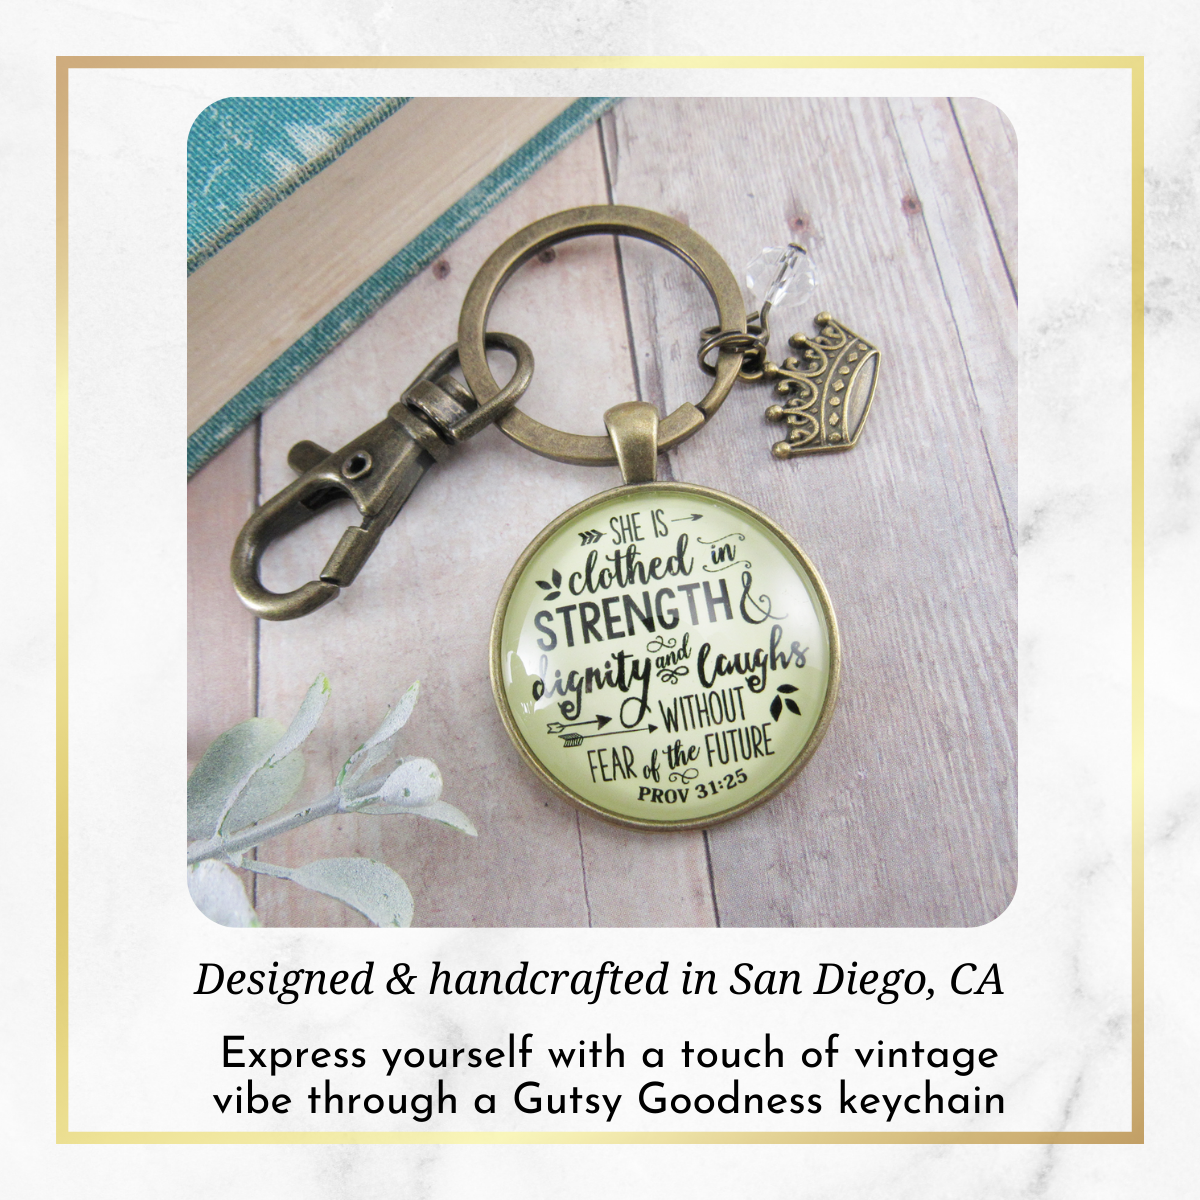 Faith Keychain She Clothed Strength Dignity Women of Truth Proverb 31 Believer Gift - Gutsy Goodness Handmade Jewelry;Faith Keychain She Clothed Strength Dignity Women Of Truth Proverb 31 Believer Gift - Gutsy Goodness Handmade Jewelry Gifts